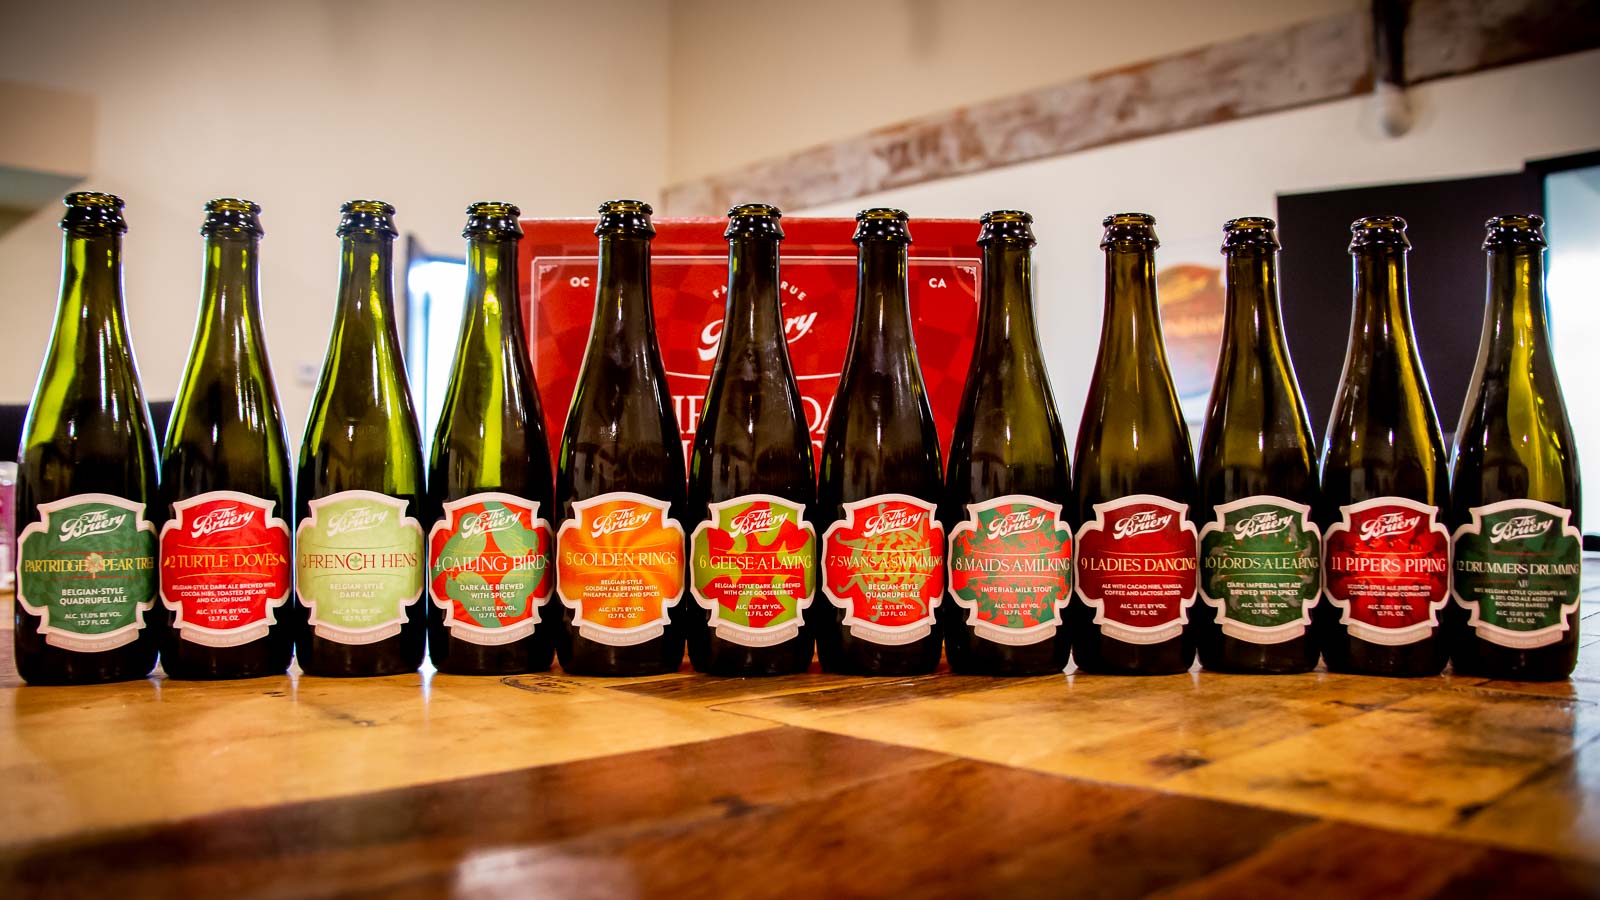 Pictured: The 12 Days Collection from The Bruery.